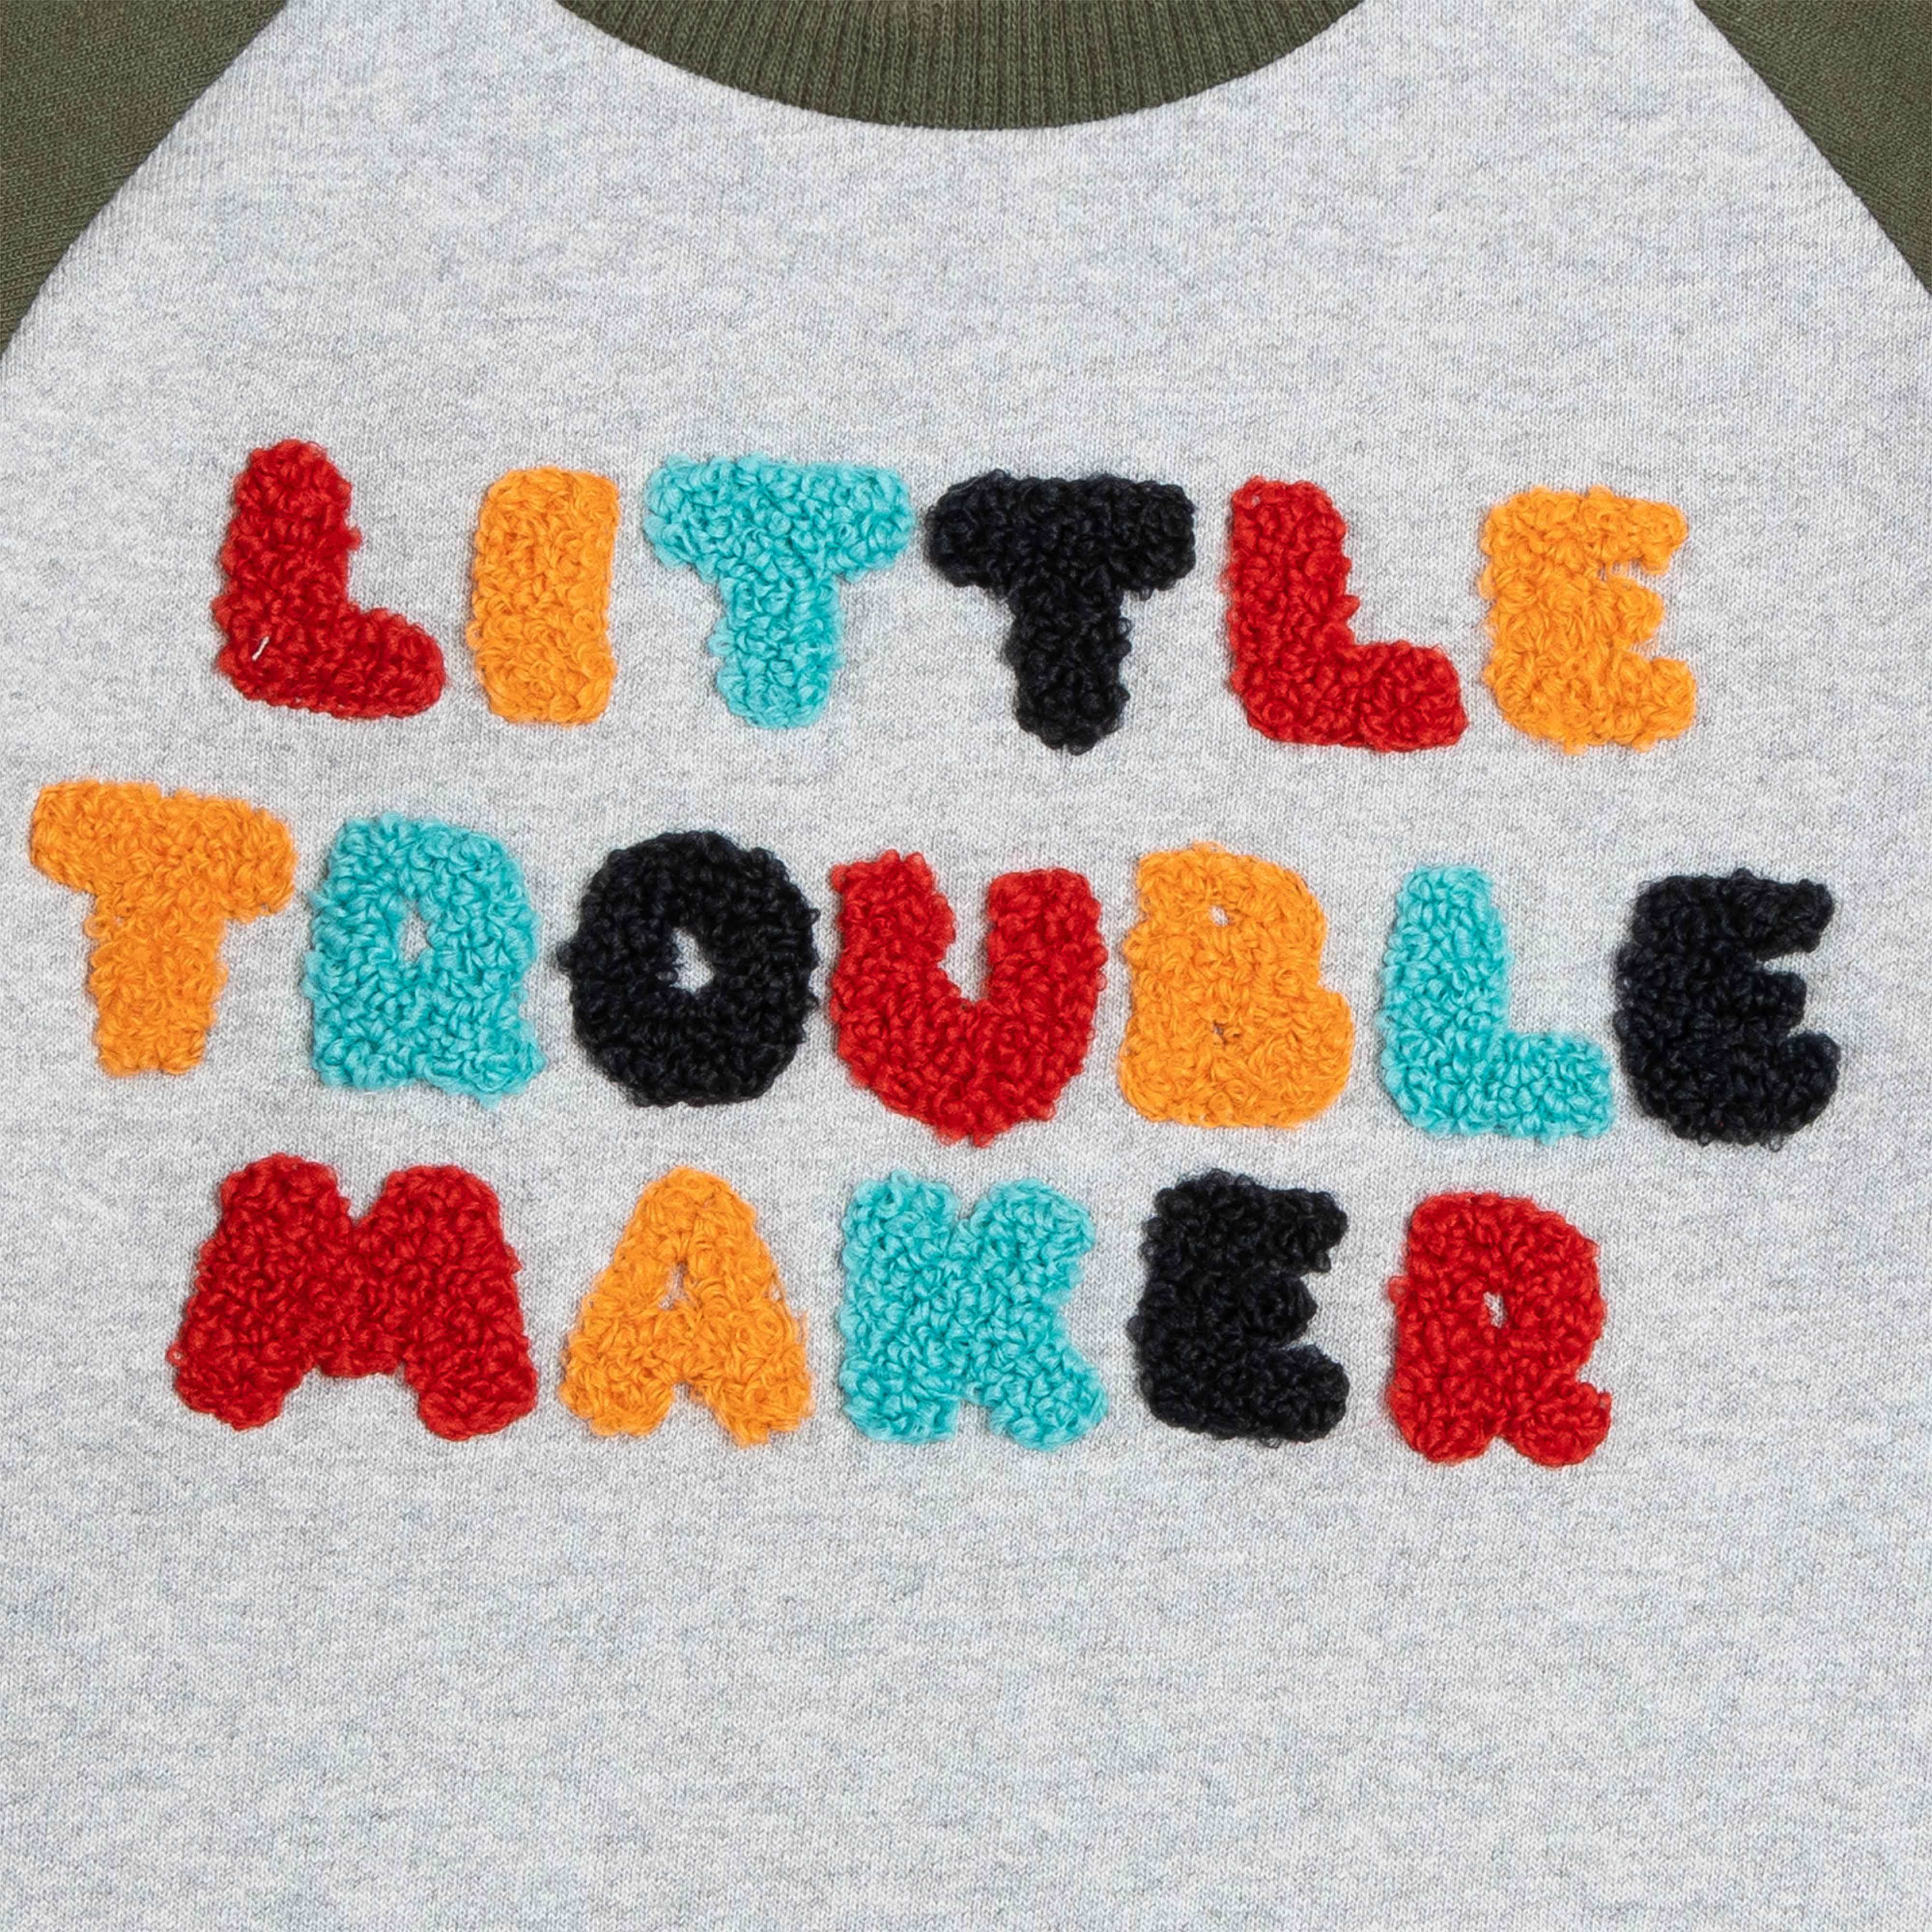 Boys Full Sleeve Little Trouble Maker Embroidery T Shirt With Jogger Pant